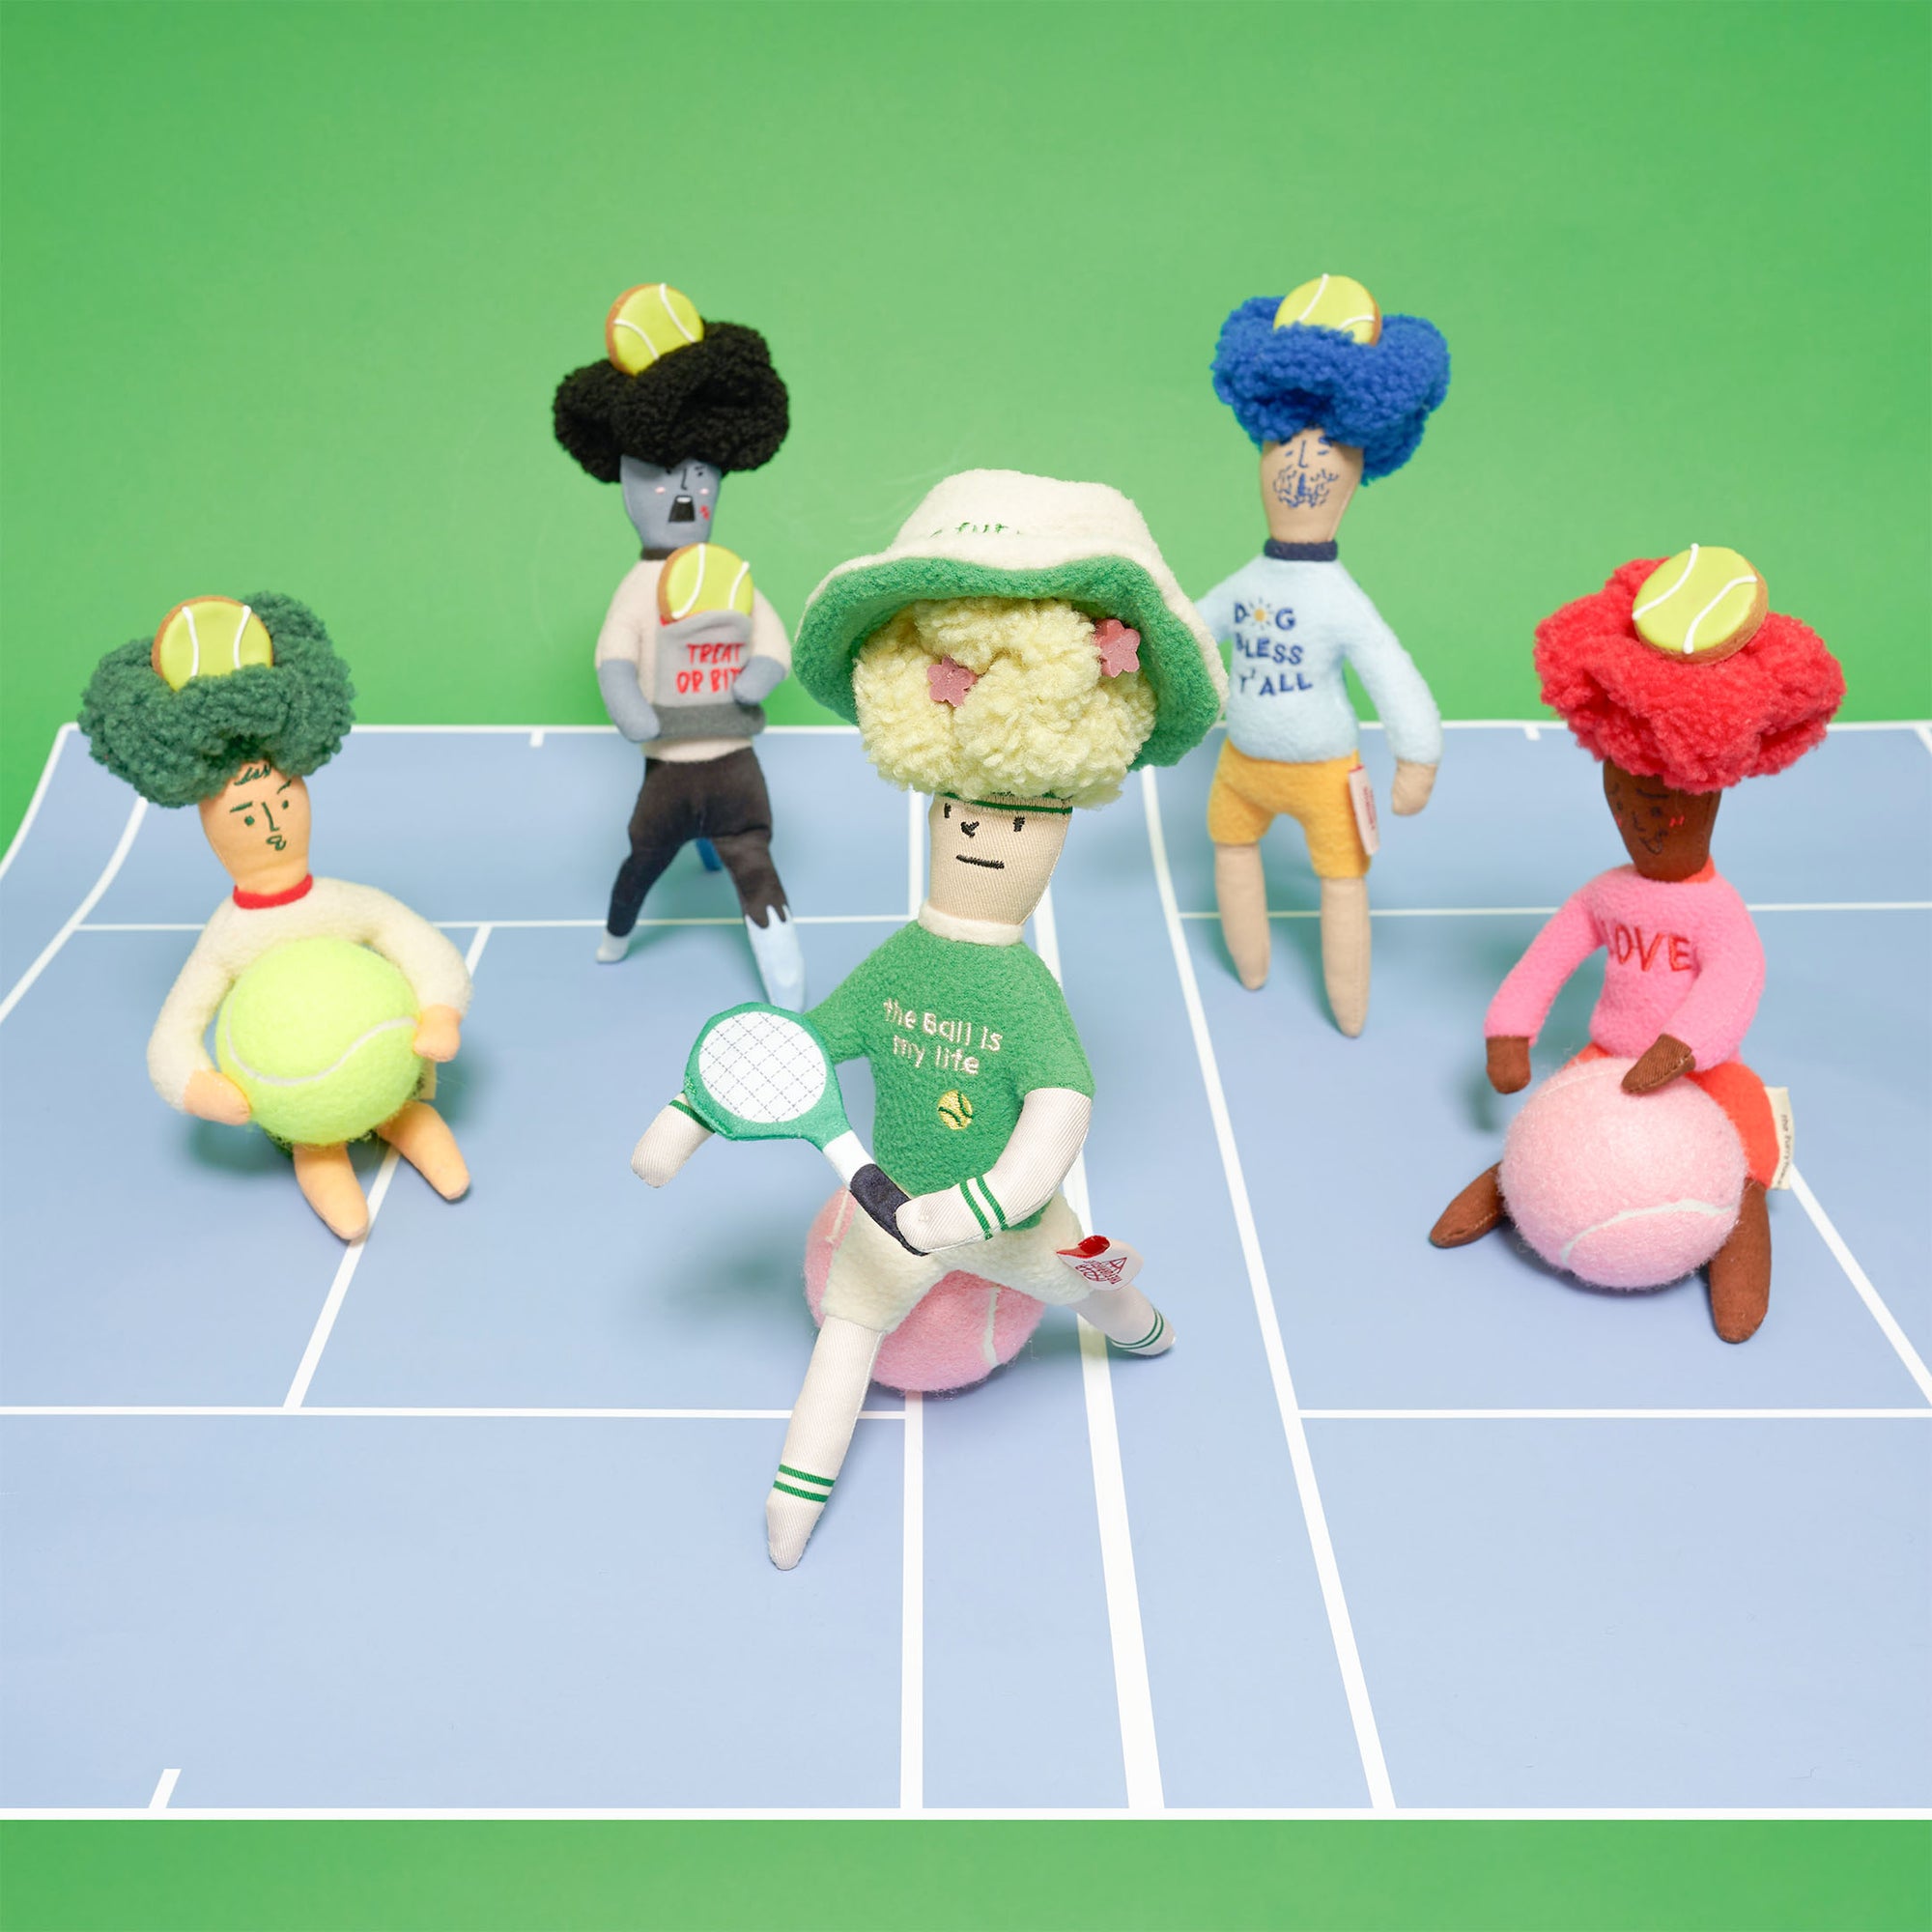 The image displays a collection of plush toys on a surface designed to look like a tennis court. Each toy is uniquely styled with different colors and outfits. The central toy wears a green sweater with "the ball is my life" and holds a tennis racket. Other toys include sweaters and hats in different colors. This scene is vibrant and playful, set against a backdrop of light green and blue, symbolizing the tennis court.